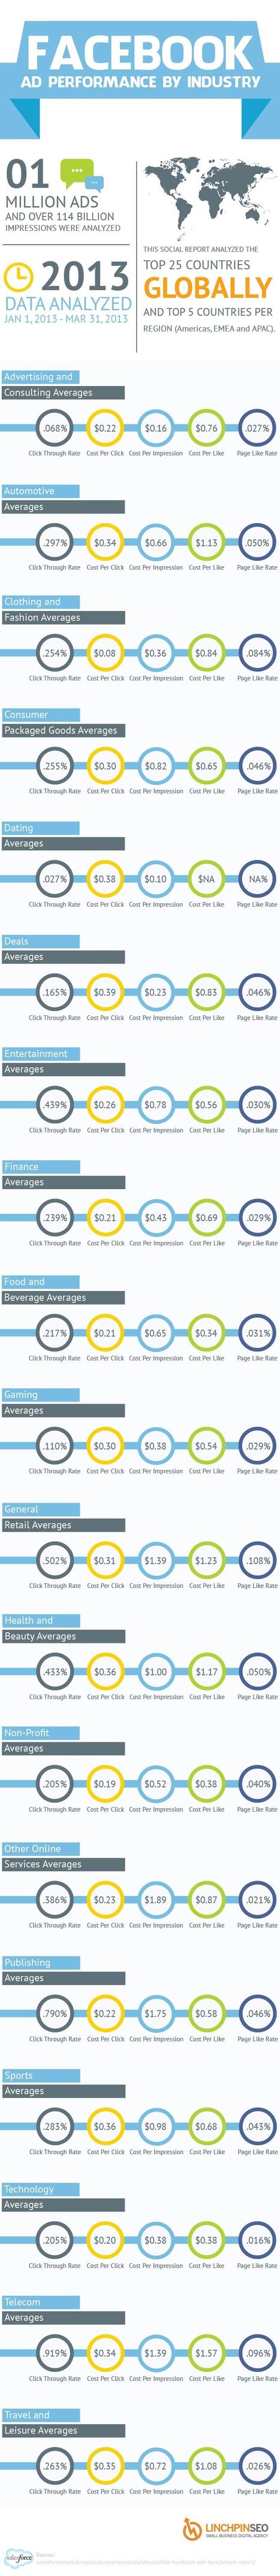 Are Facebook Ads Worth The $? Telecom and Fashion Rule [Infographic] | Curation Revolution | Scoop.it